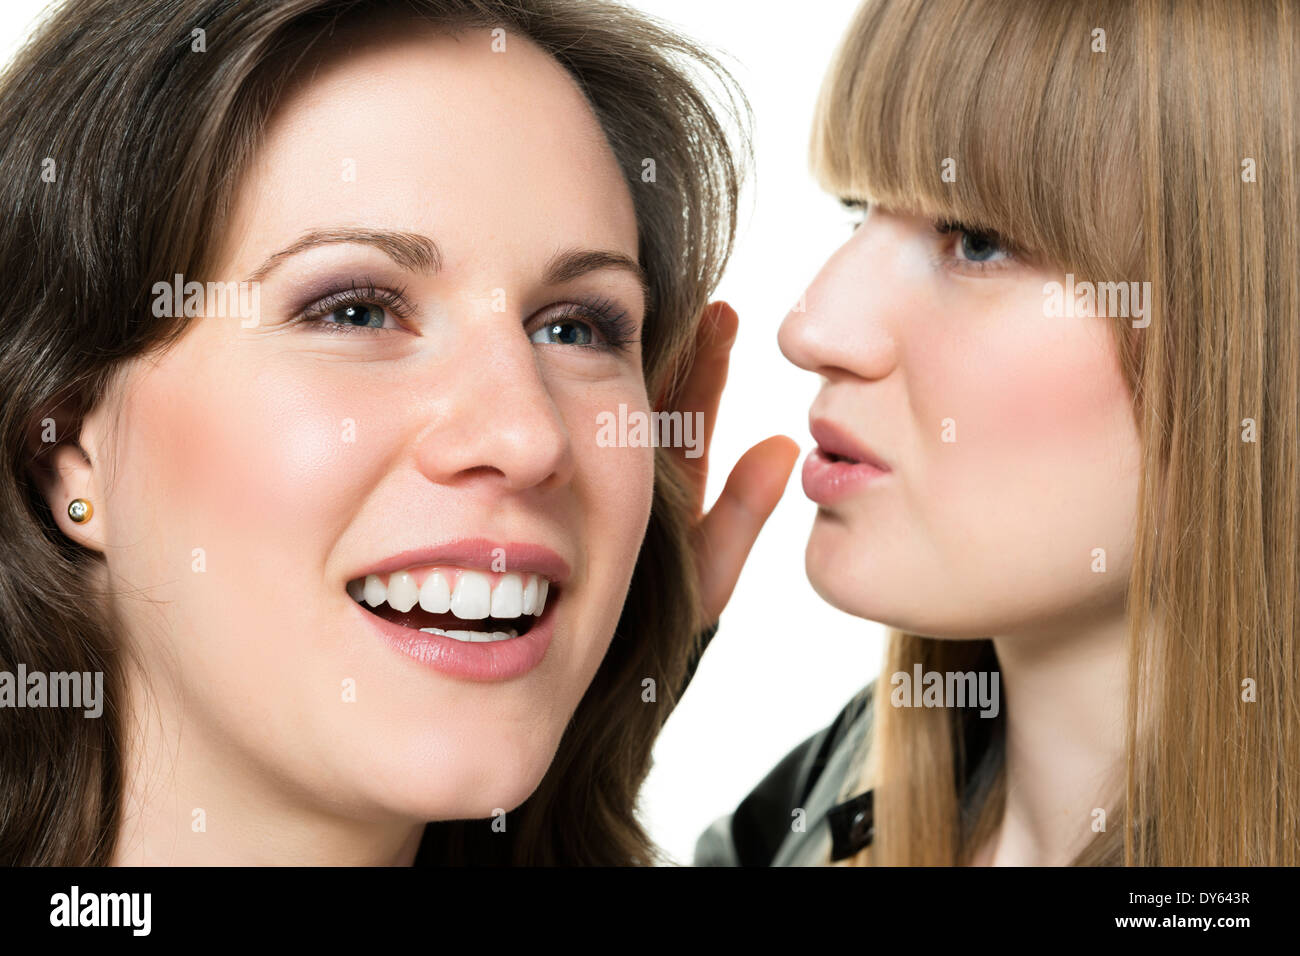 Two women blonde and brunette, with black and white leather jacket, one whispers to the other something Stock Photo